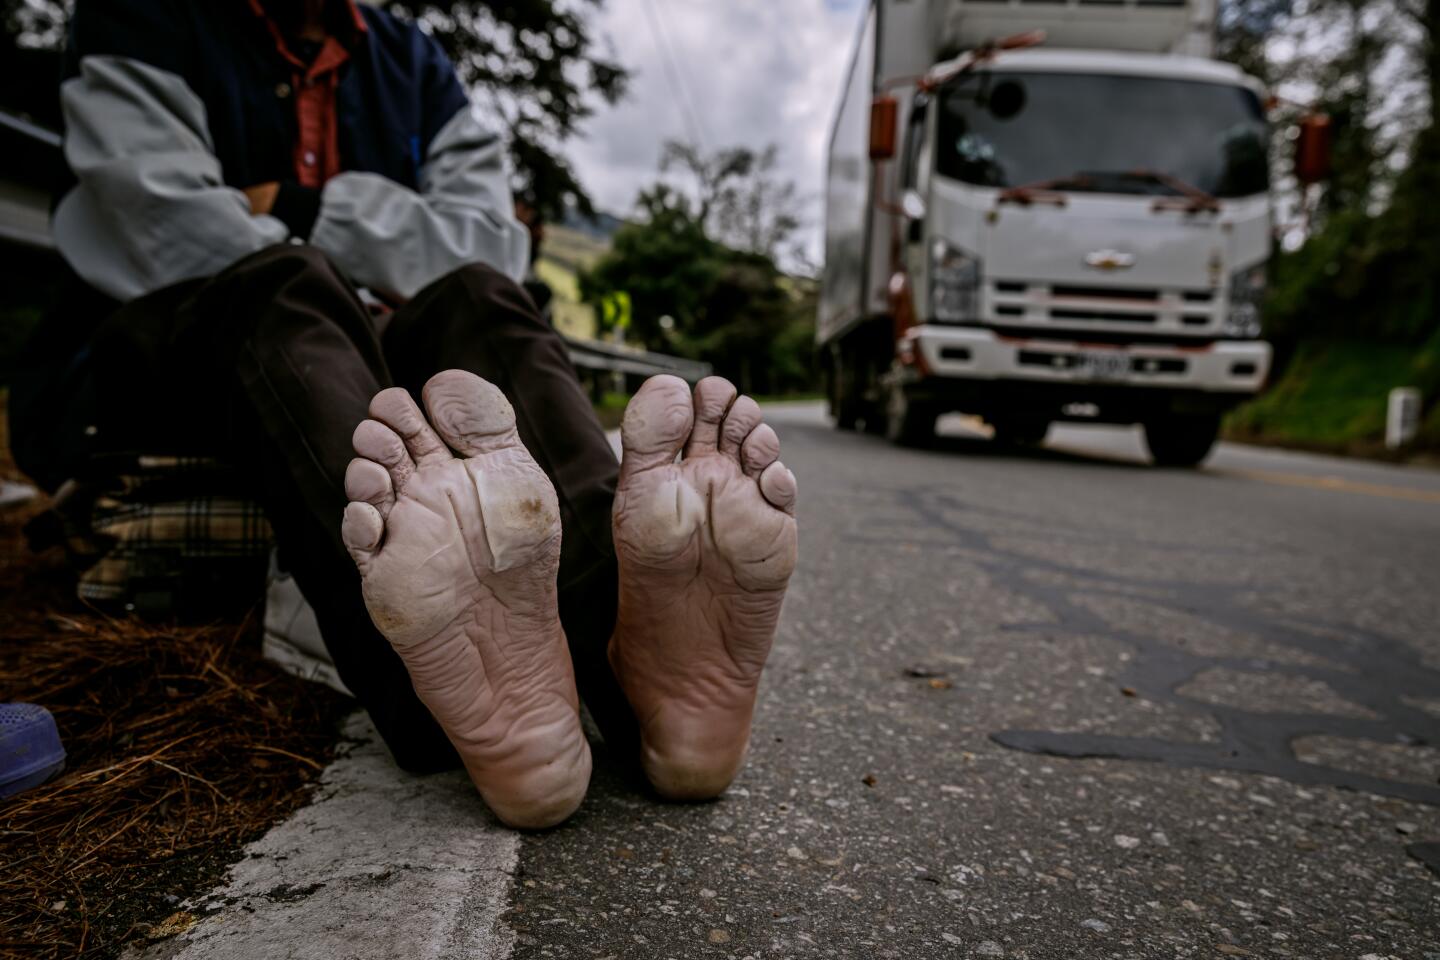 Ramon Cohil, 33, stretches his legs and airs out his feet, which are covered in blisters, near La Laguna, Colombia.